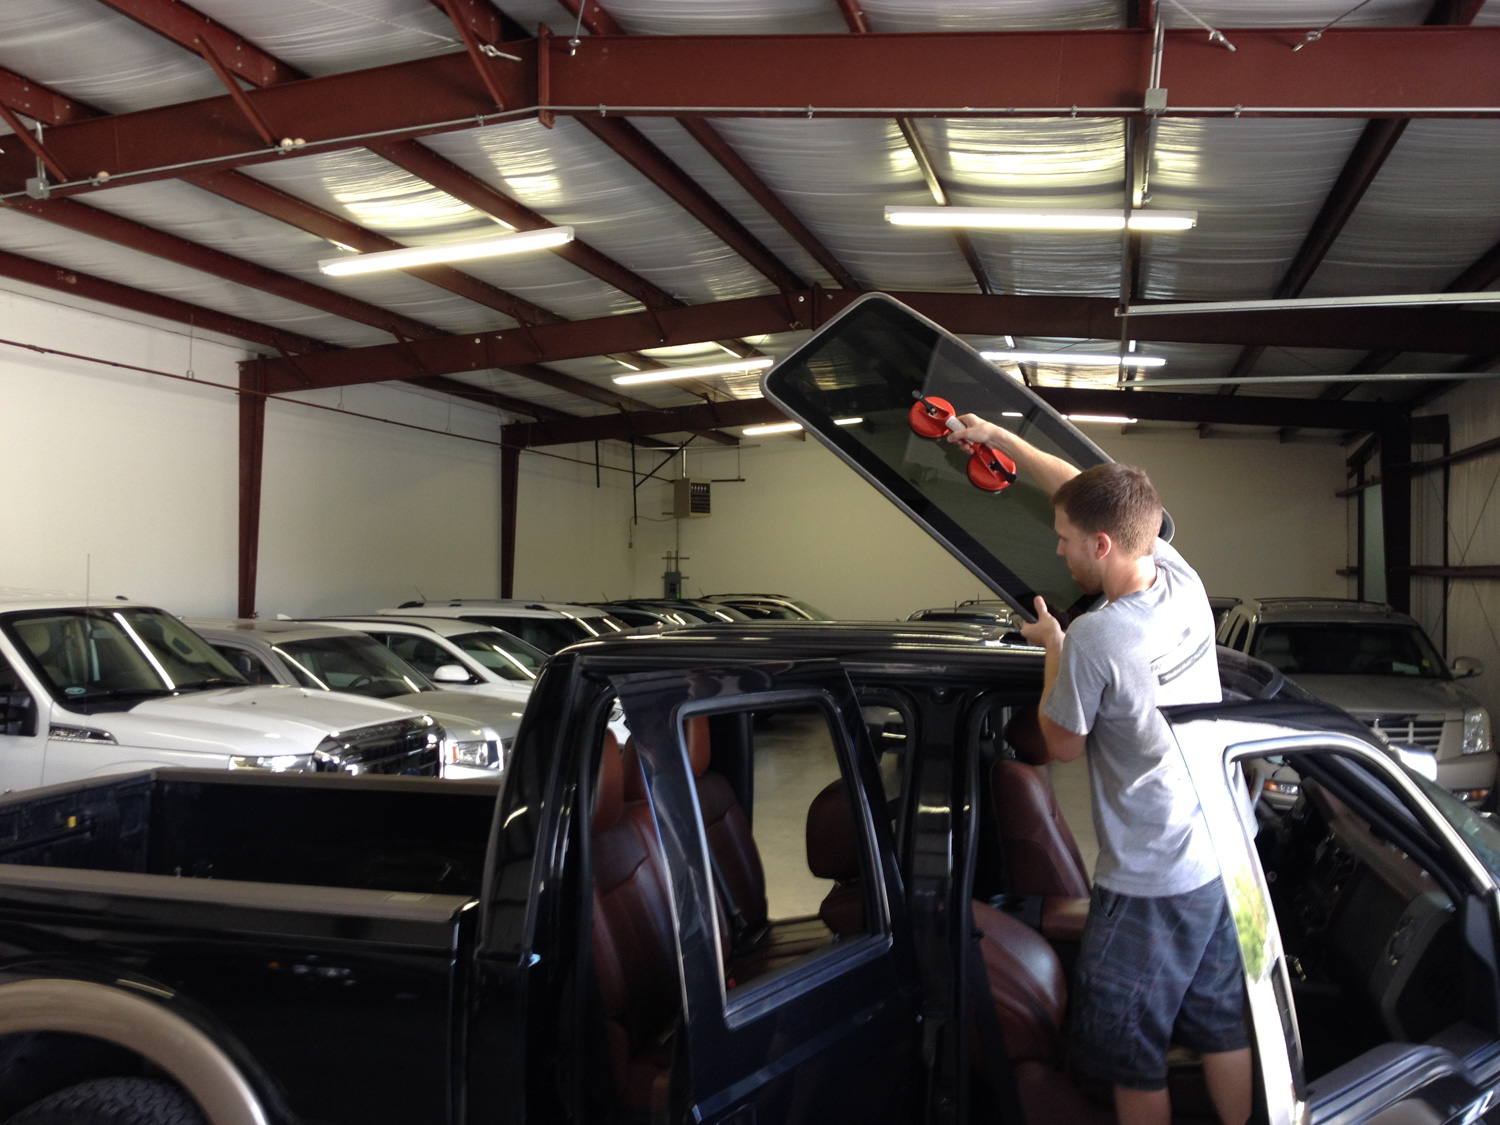 Sunroof glass installation on Ford F-150 truck